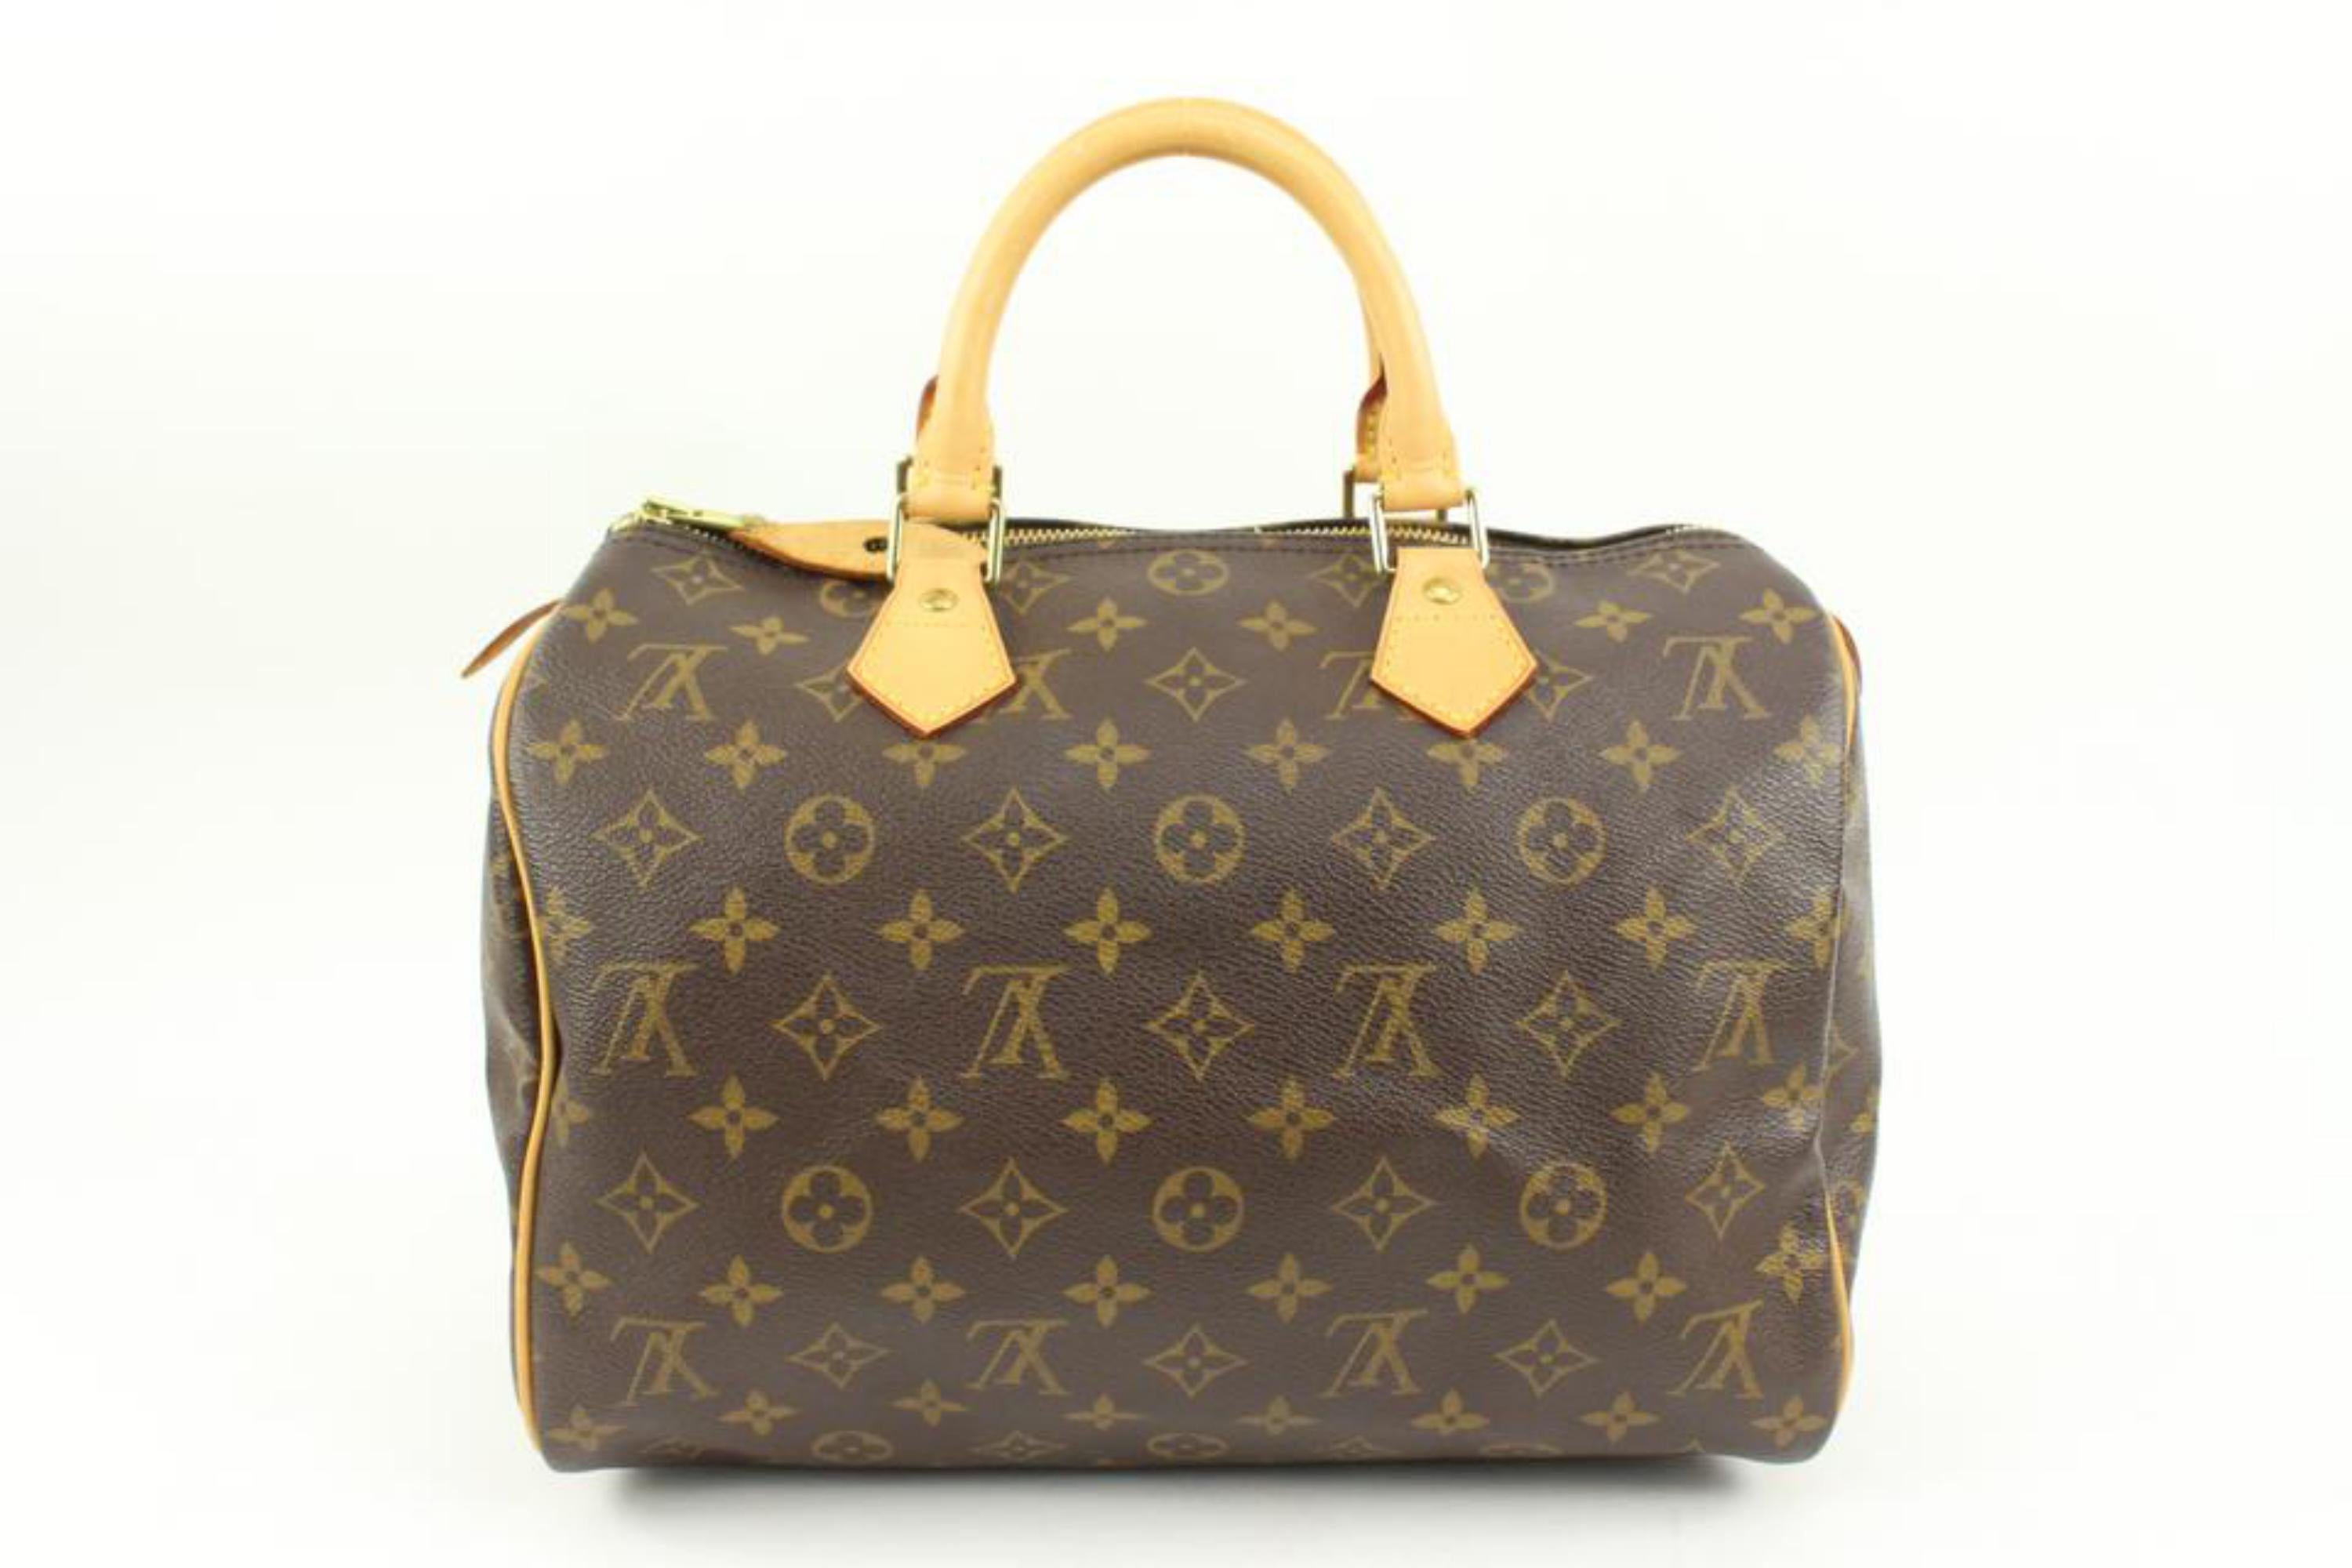 Louis Vuitton Monogram Speedy 30 Boston Bag MM 31lv223s In Excellent Condition For Sale In Dix hills, NY